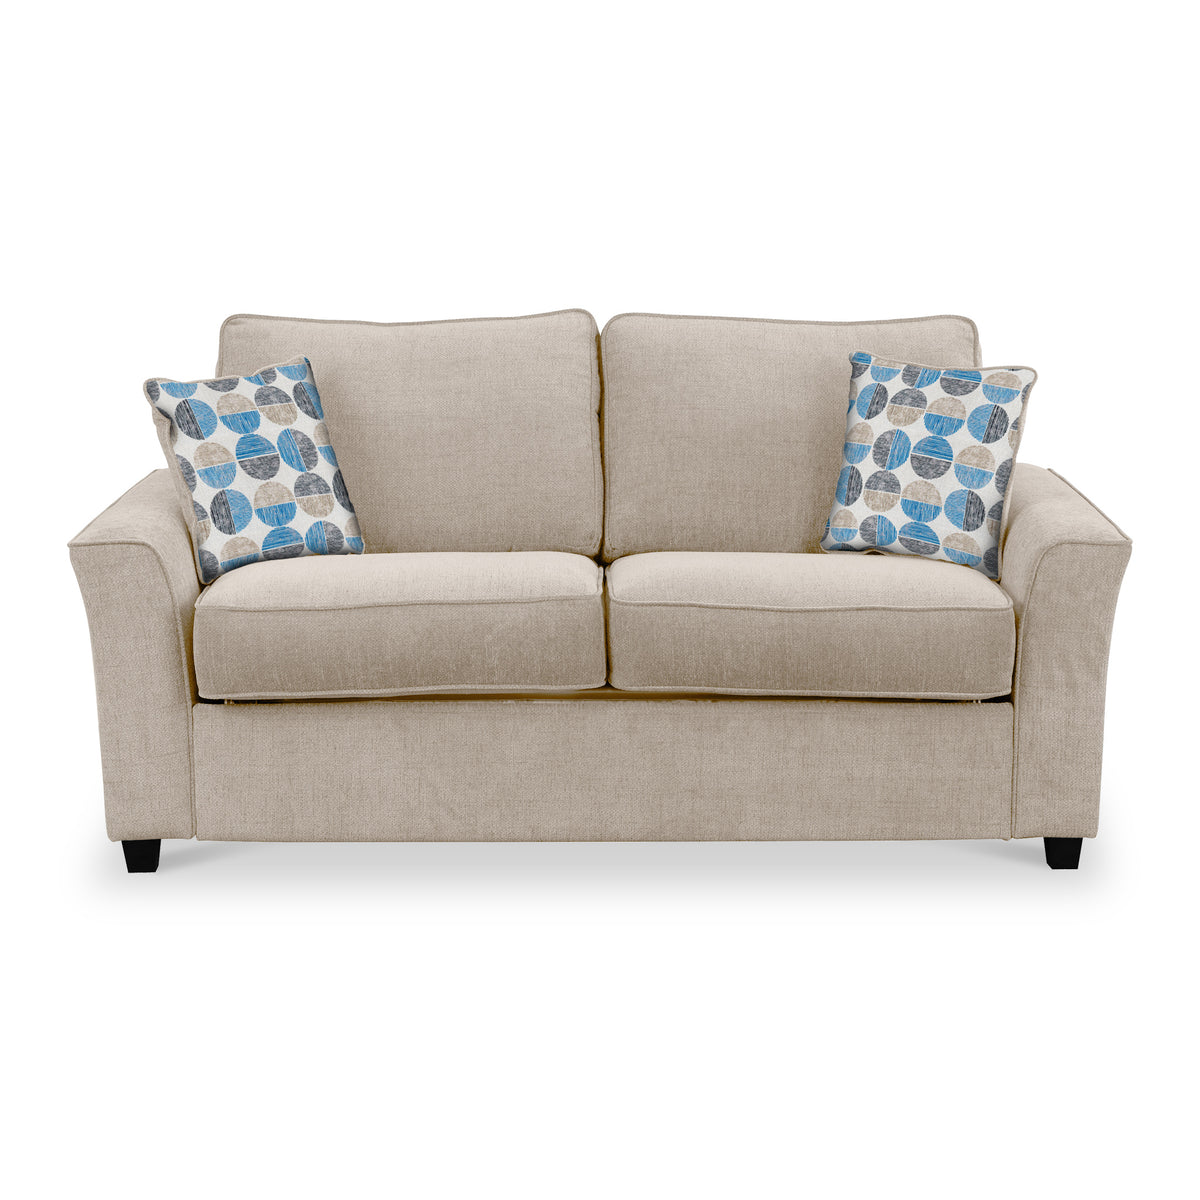 Boston 2 Seater Sofabed in Fawn with Rufus Blue Cushions by Roseland Furniture